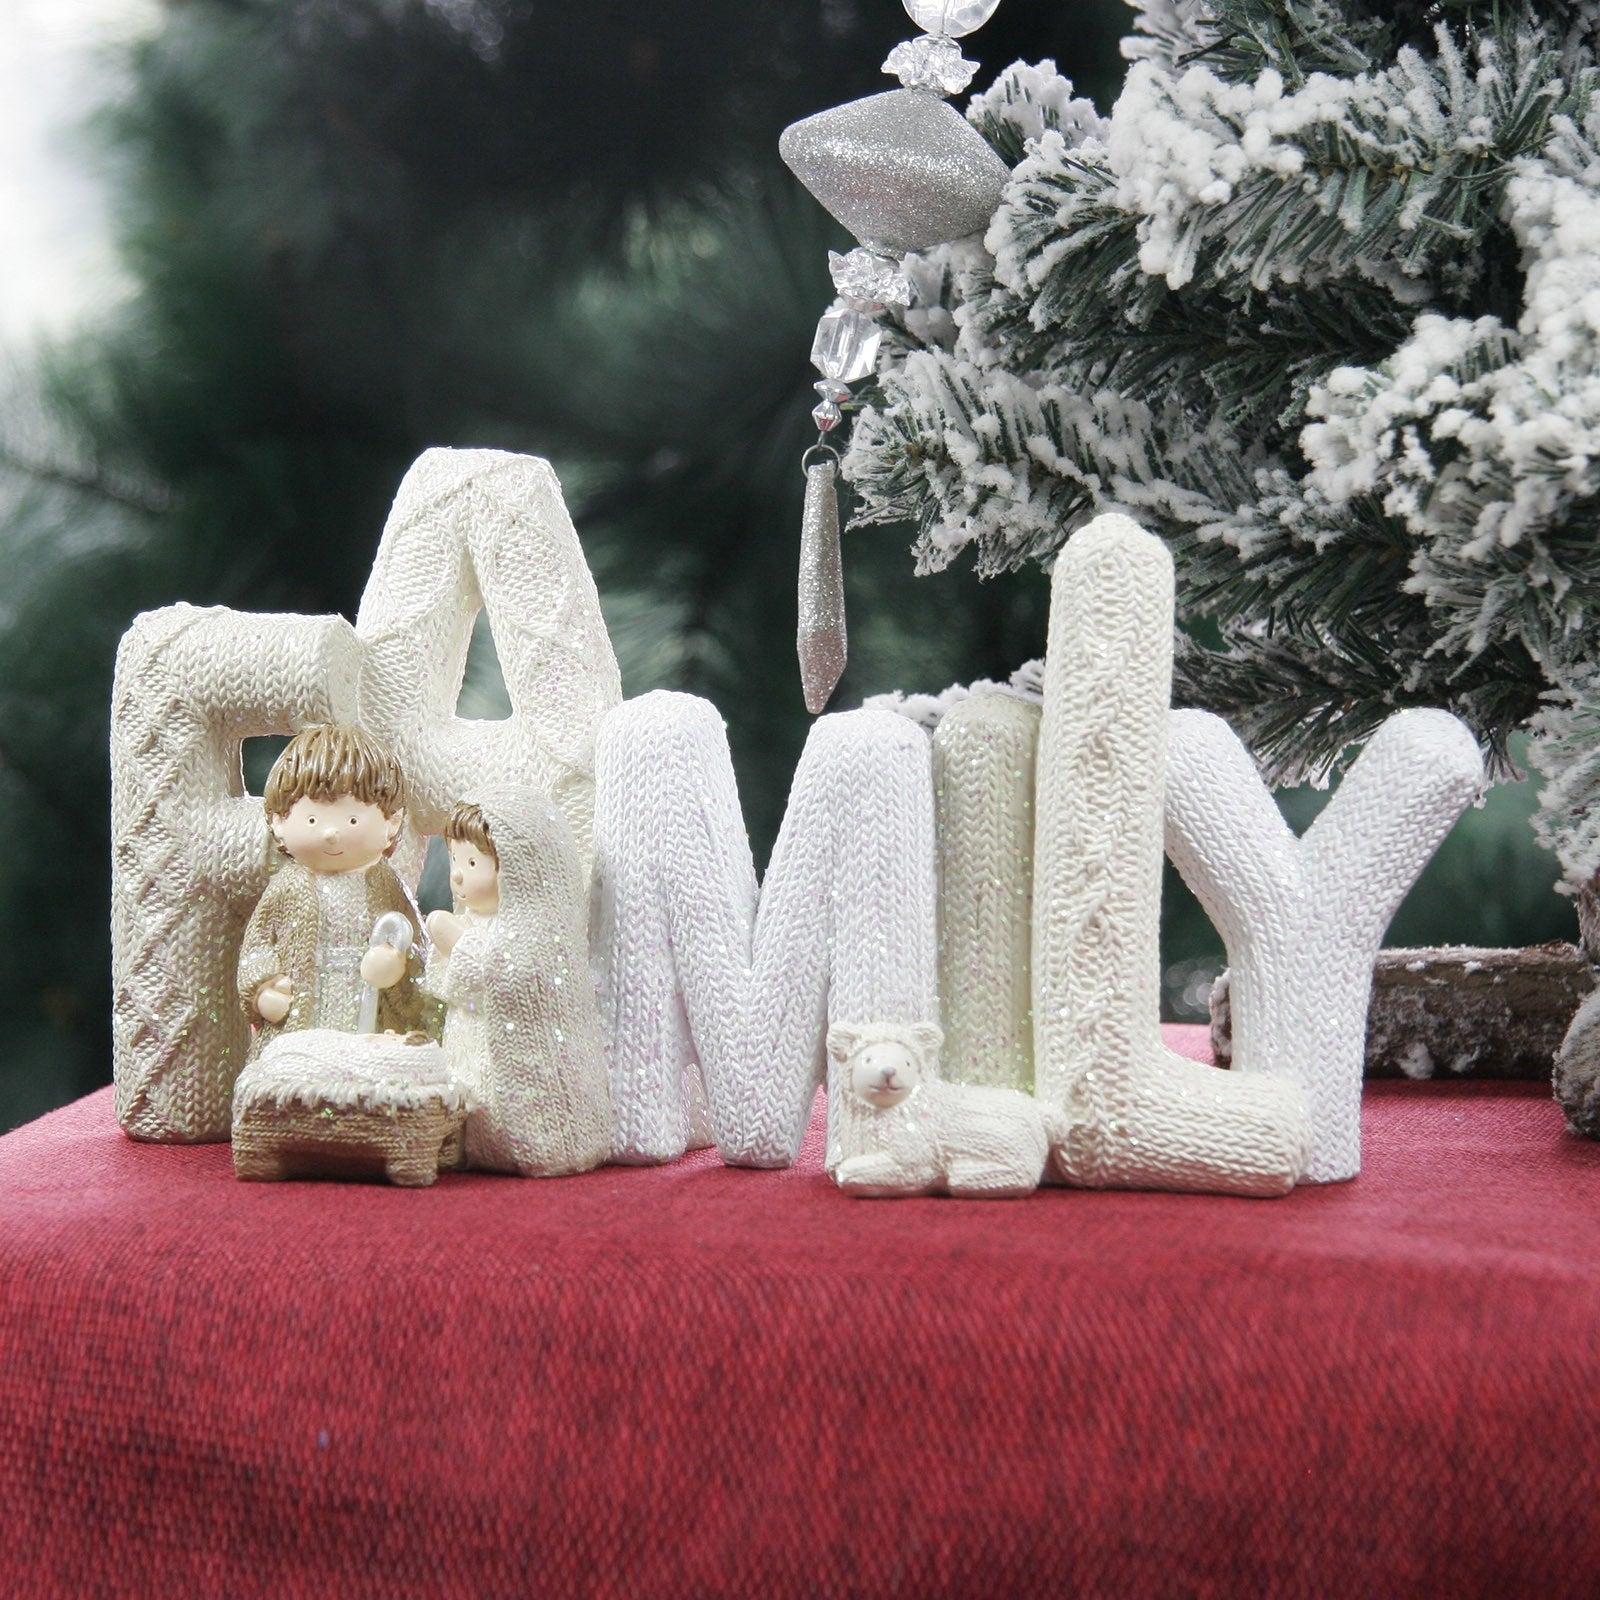 It's time to get sentimental with family ornament and gift in christmas